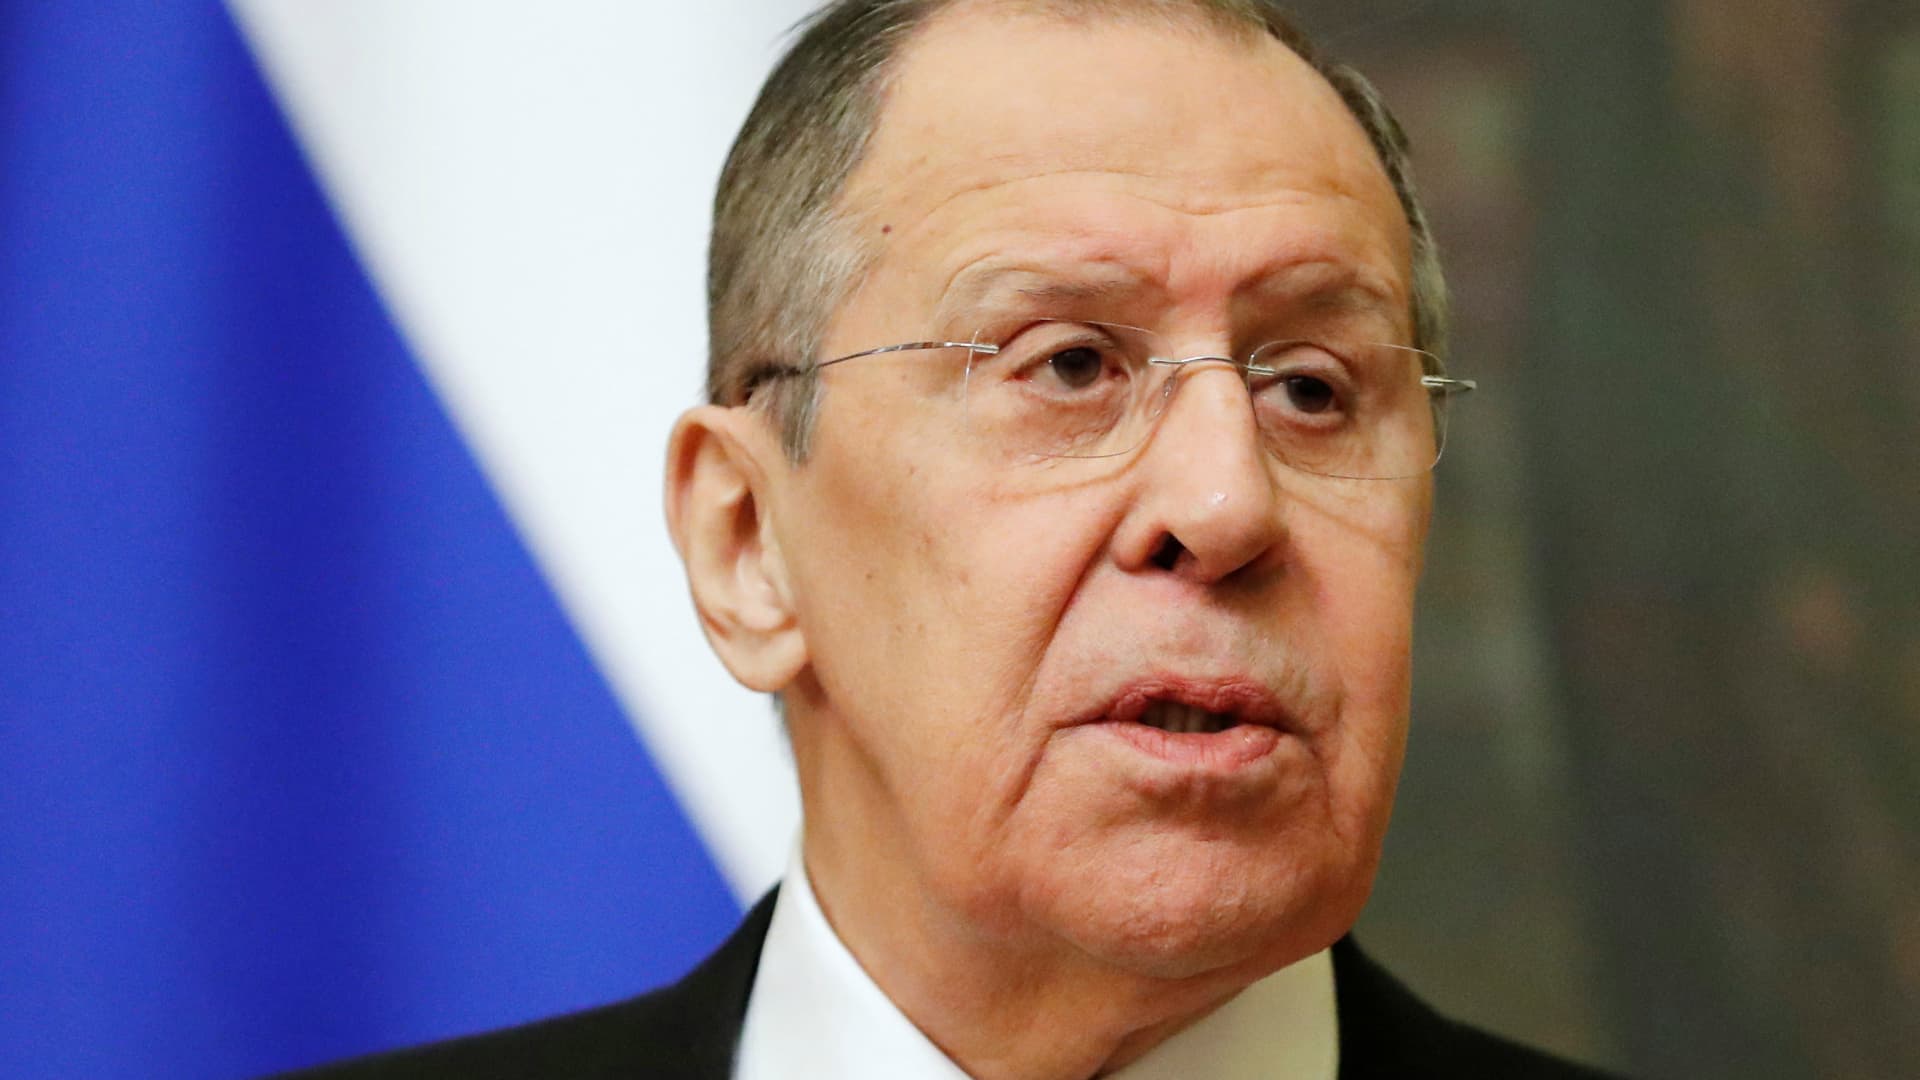 Russia's Foreign Minister Sergei Lavrov attends a joint news conference with OSCE Chairman-in-Office, Poland's Minister for Foreign Affairs Zbigniew Rau in Moscow, Russia February 15, 2022.